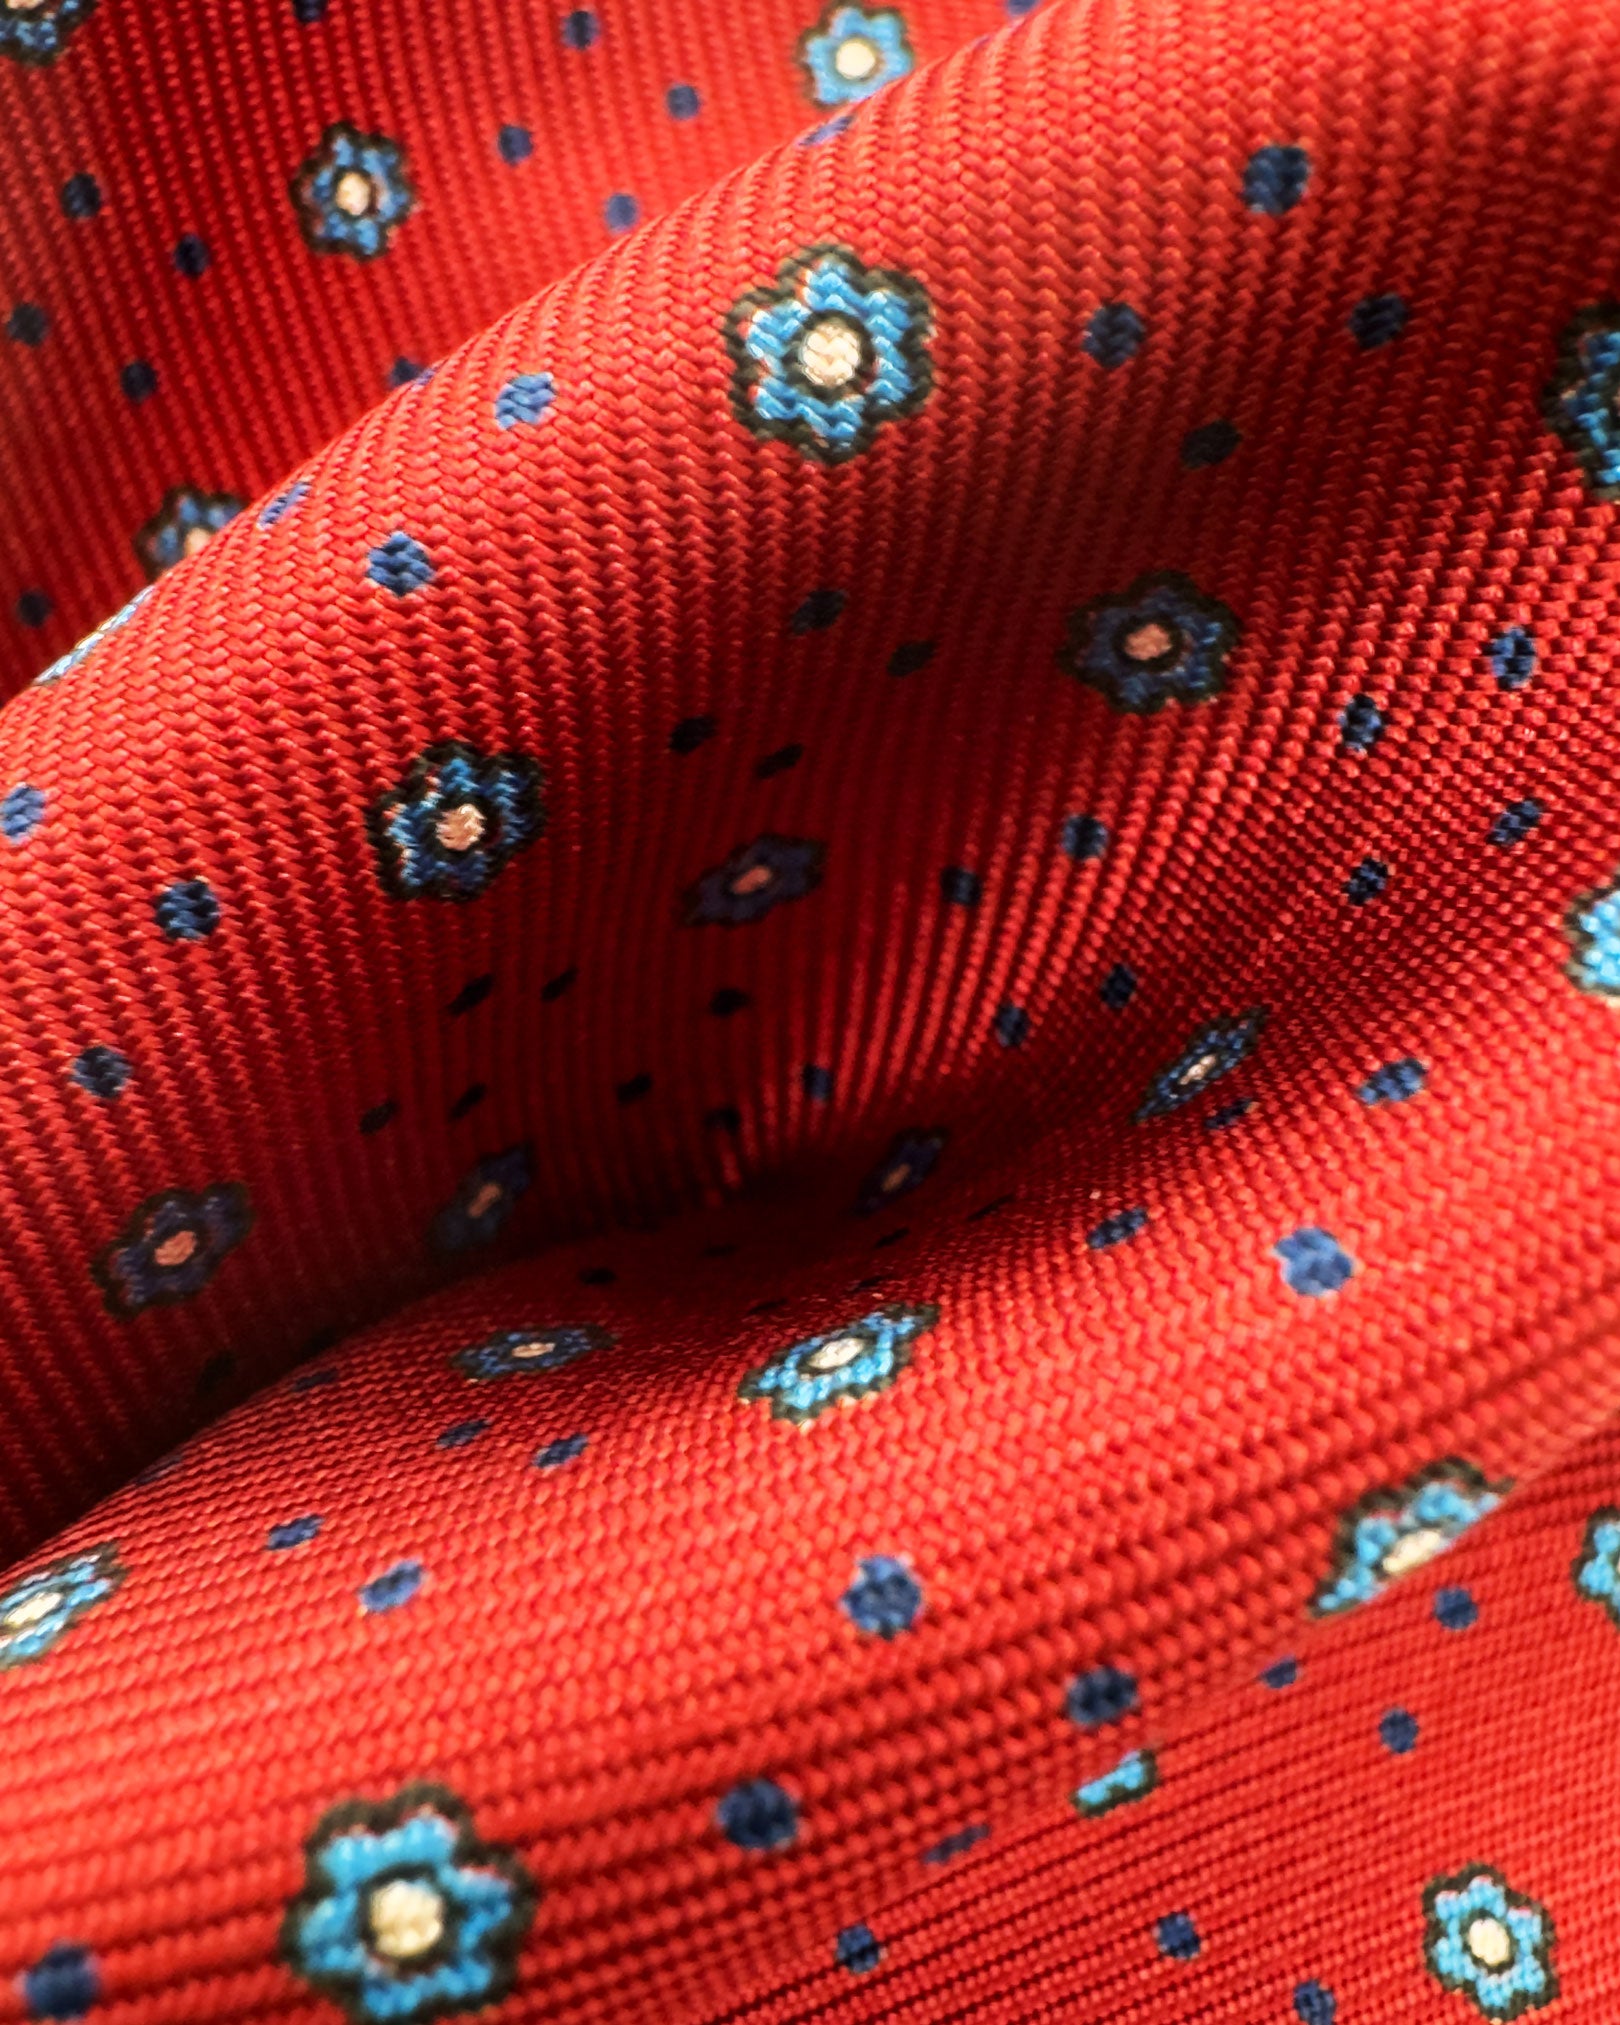 A ruffled close-up of the 'Studley' pocket square, presenting a closer view of the blue floral patterns against the attractive lustre of the deadstock silk material. 